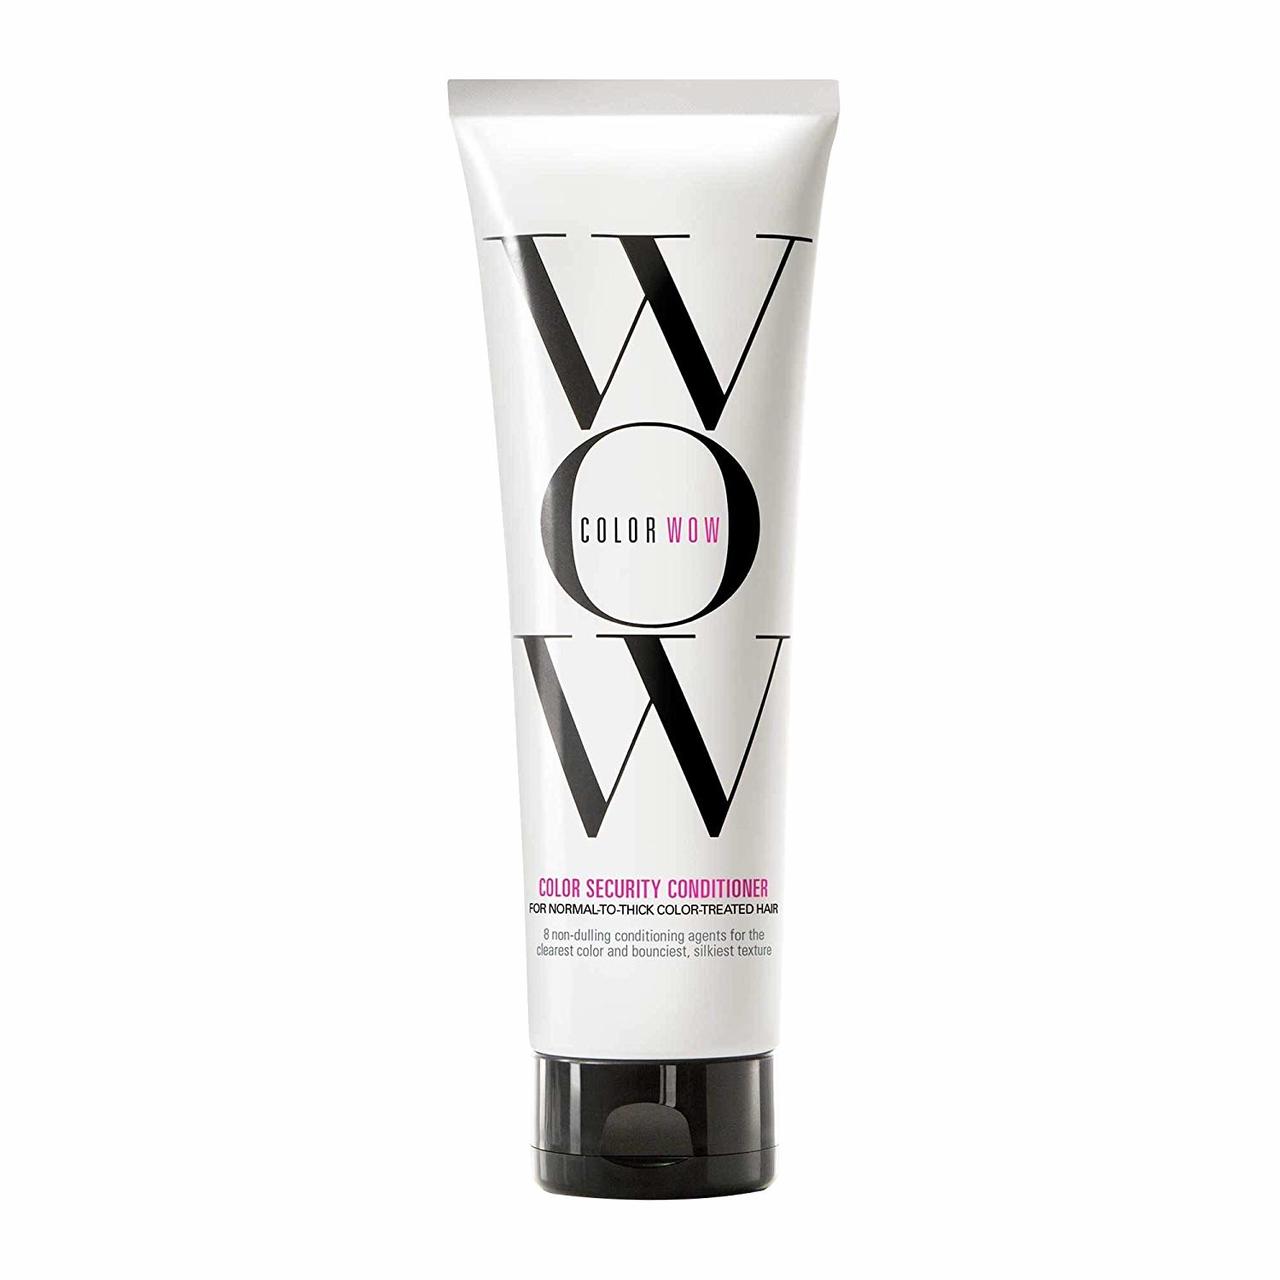 WOW colour security conditioner normal to thick hair